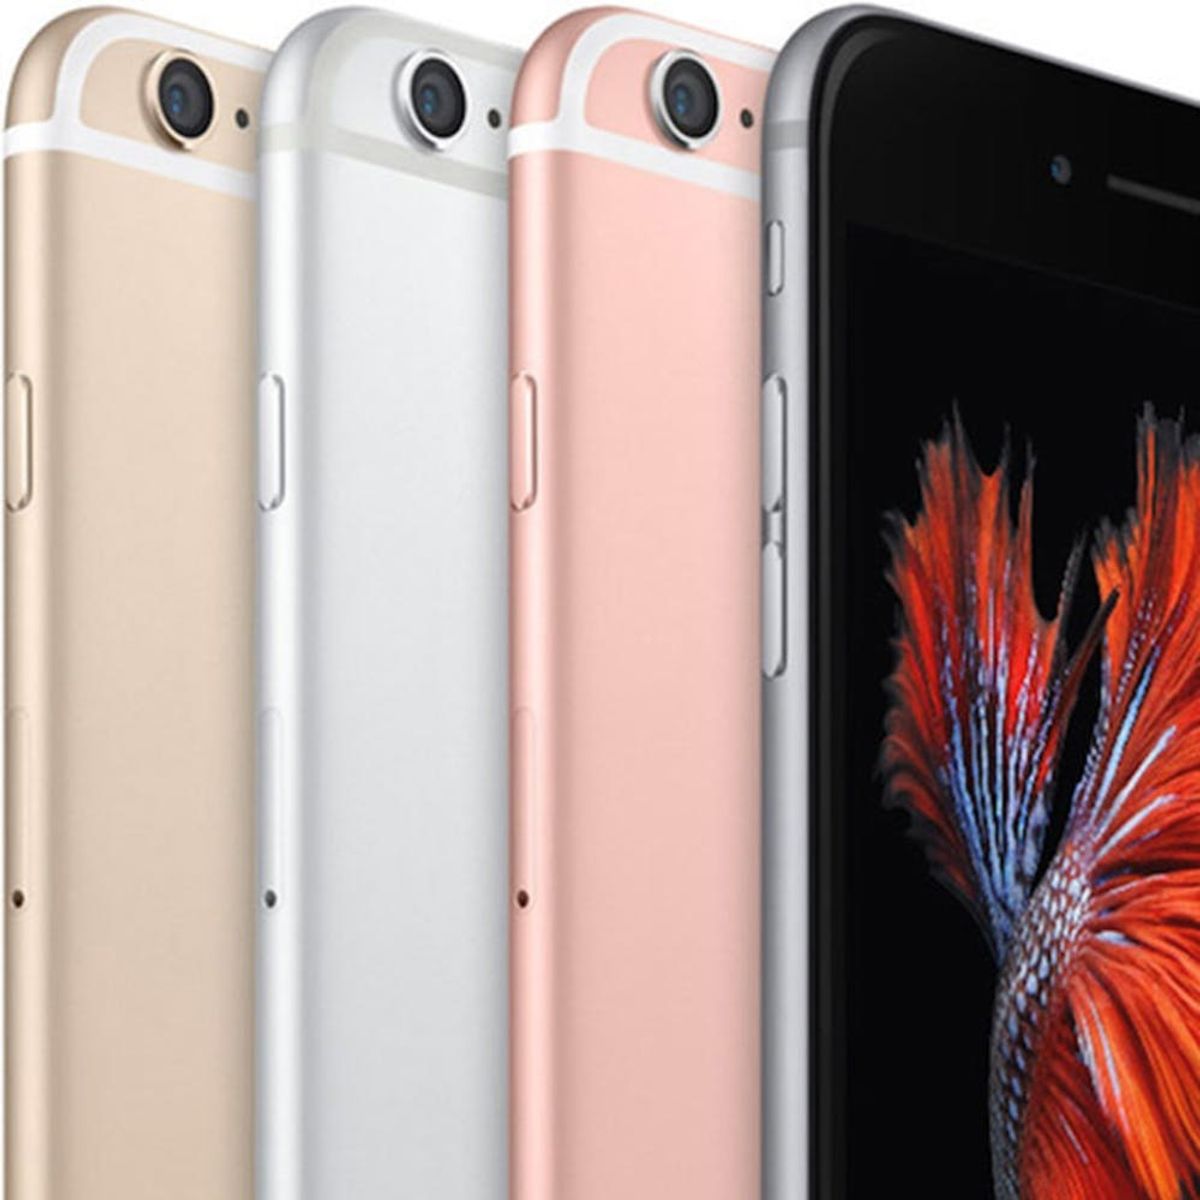 Here Are All the Rumors We’ve Heard About the iPhone 7 So Far